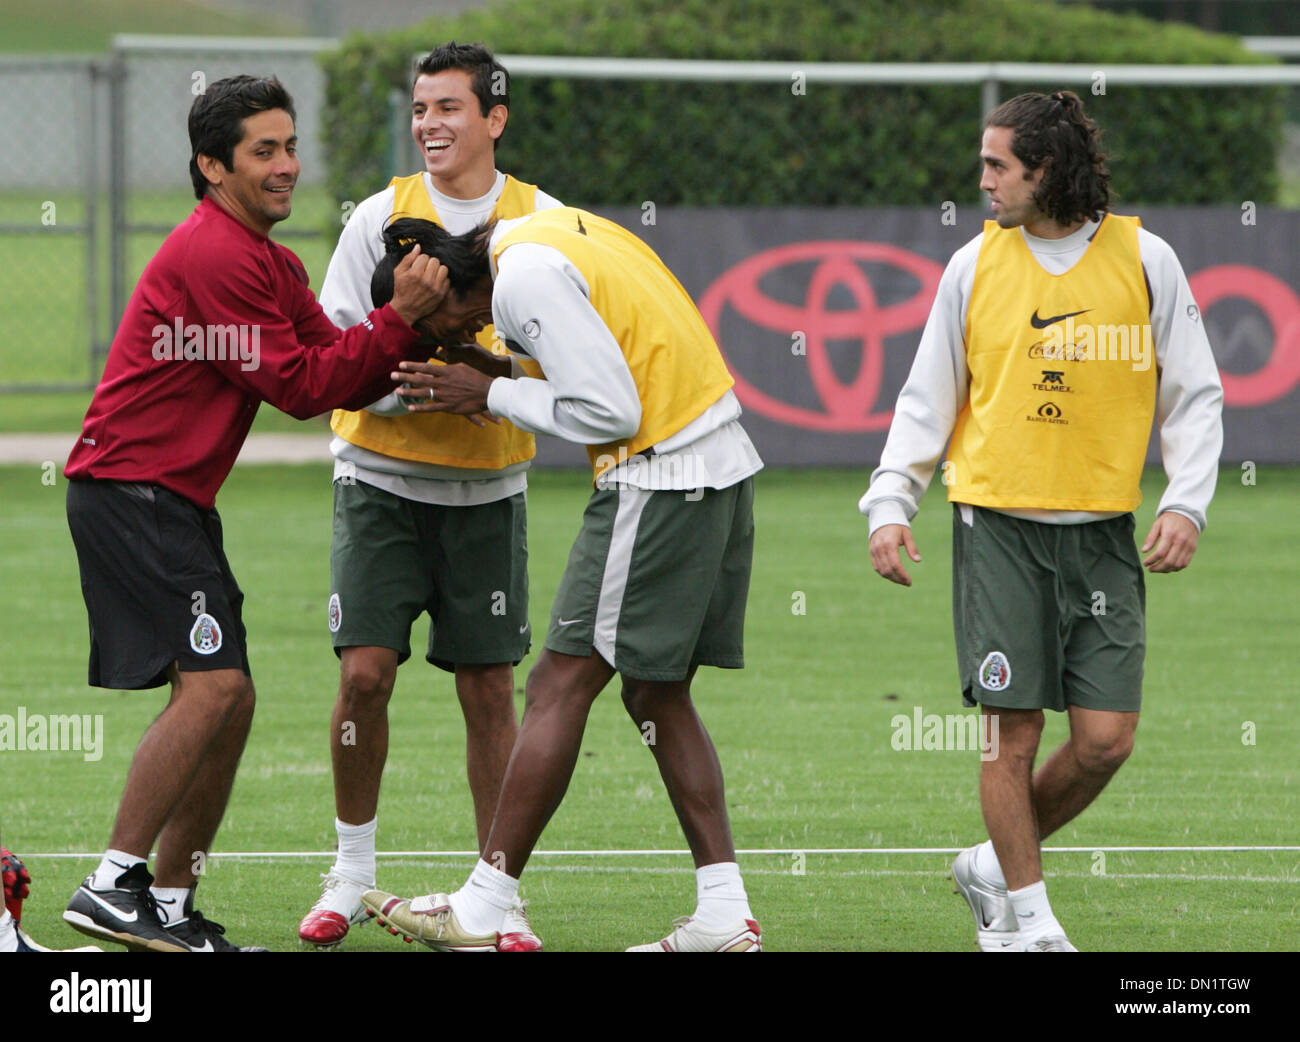 Mar 27, 2006; Mexico City, MEXICO; SOCCER: Mexico soccer team players Jorge Campos (L)  pulls Joel Huiqui's hair as Jose Antonio Castro (R) and Mario Mendez look on during a training session at the Centro Pegaso training center. Mandatory Credit: Photo by Javier Rodriguez/ZUMA Press. (©) Copyright 2006 by Javier Rodriguez Stock Photo